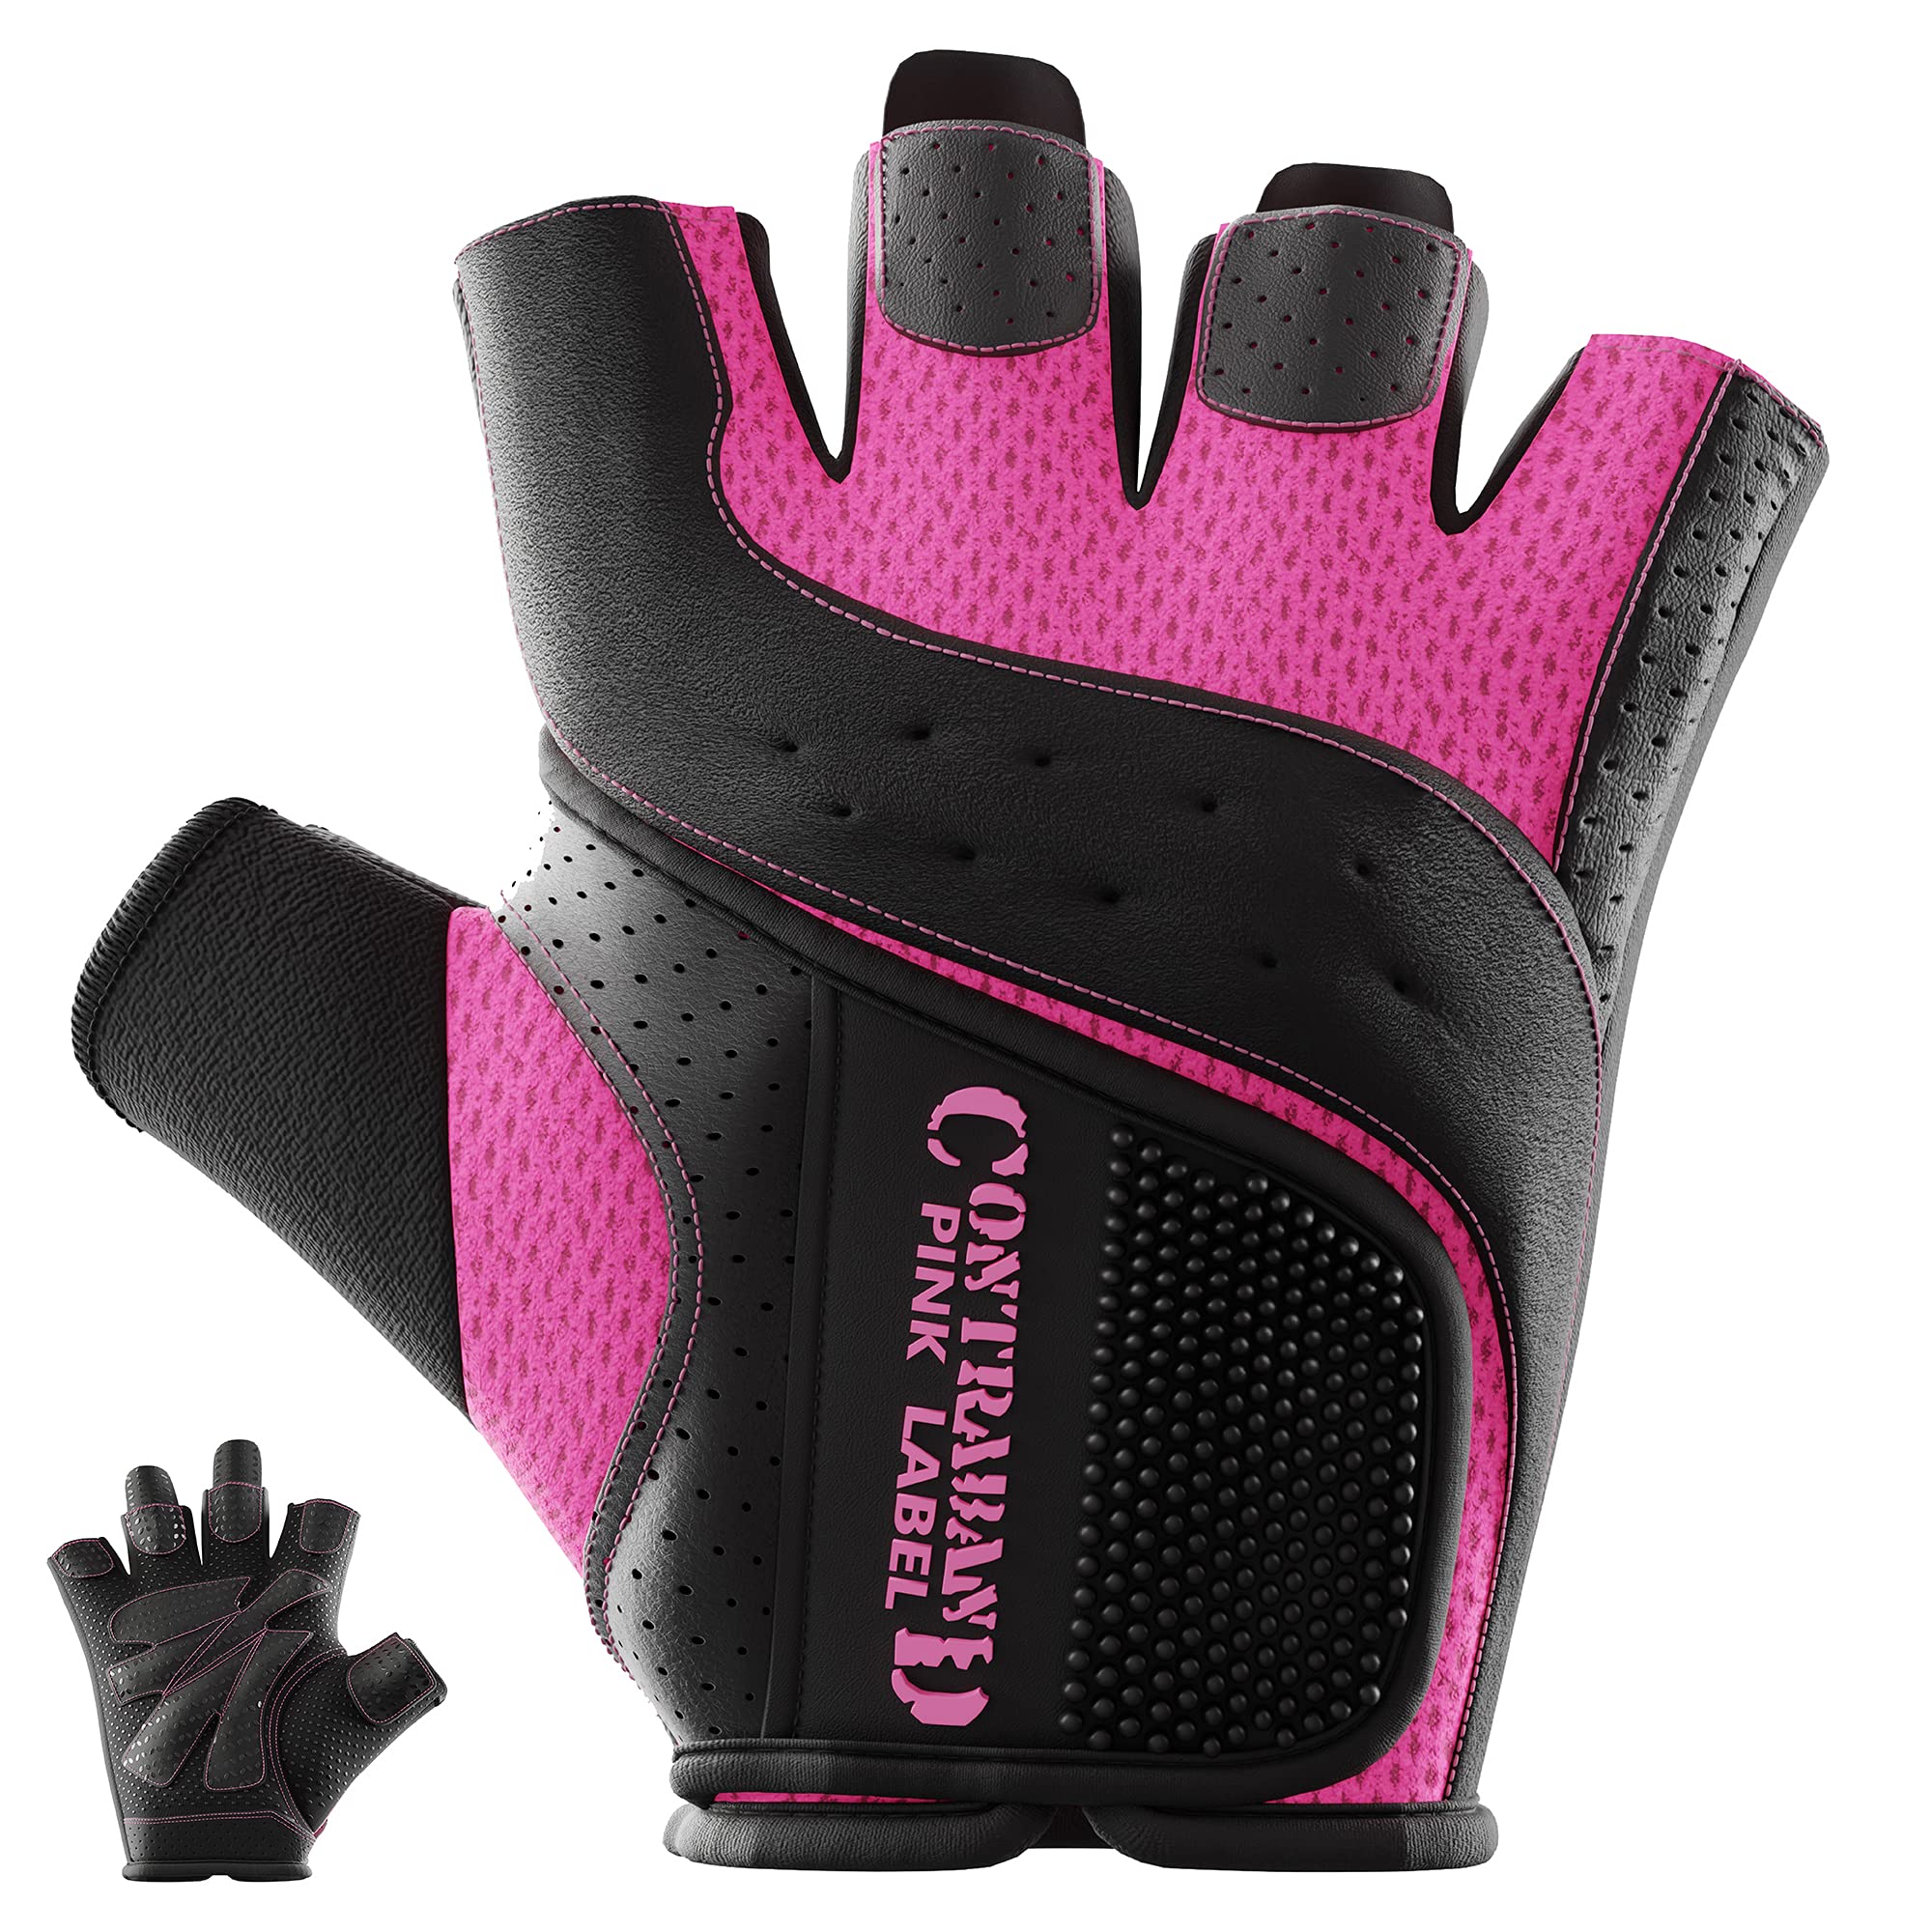 Contraband Pink Label 5137 Women's Padded Weight Lifting and Rowing Gloves  w/ Grip-Lock Padding (Pair) 